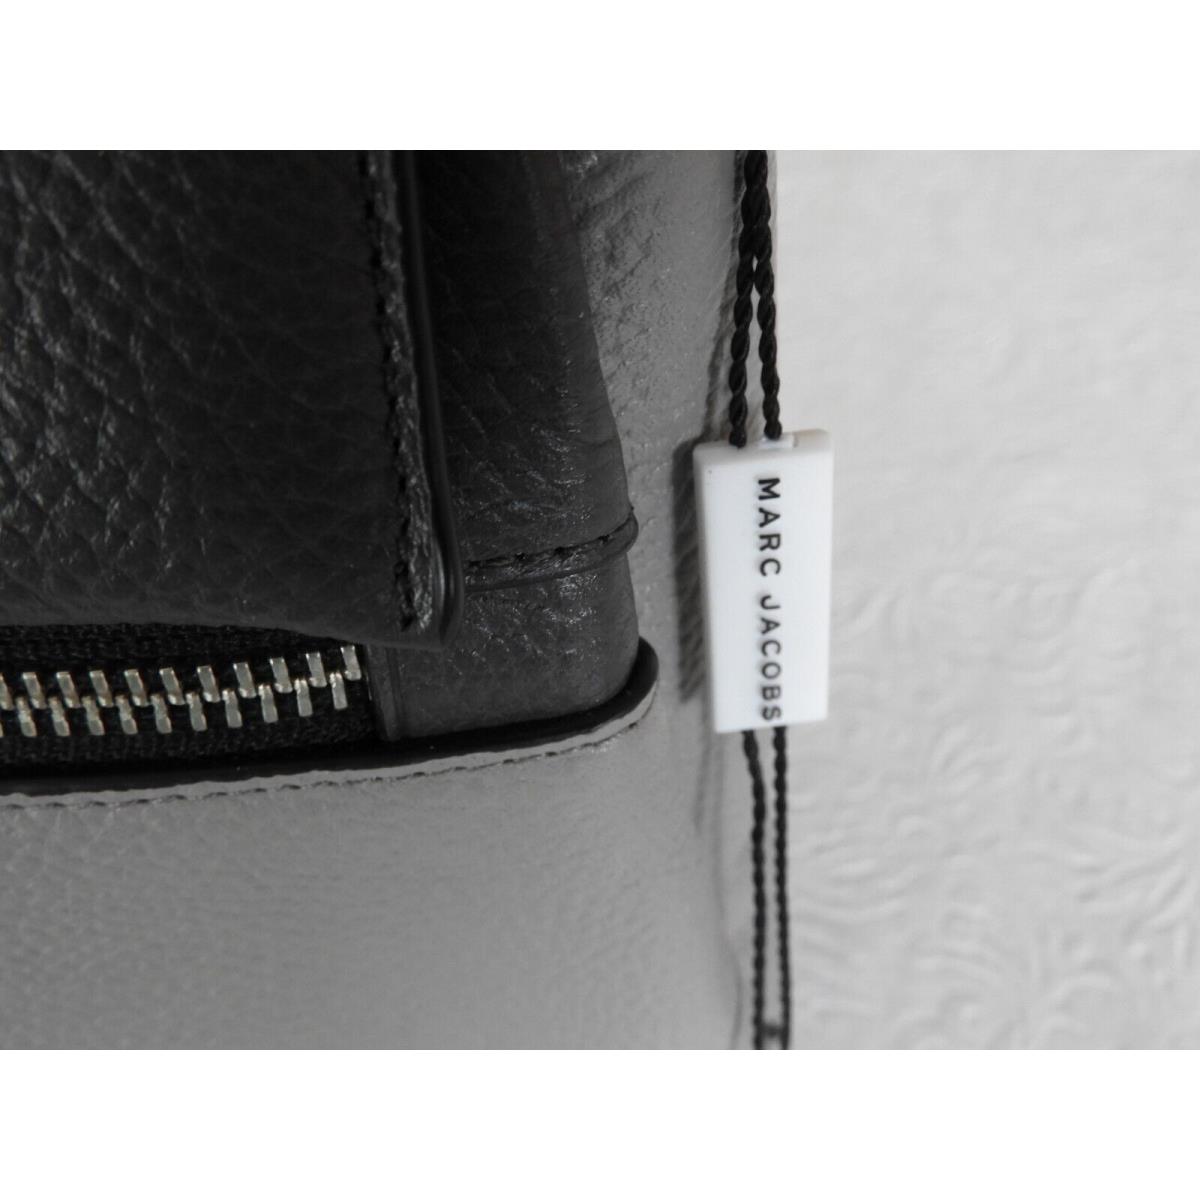 Marc Jacobs  bag   - Gray Handle/Strap, Silver Hardware, Black Lining 2